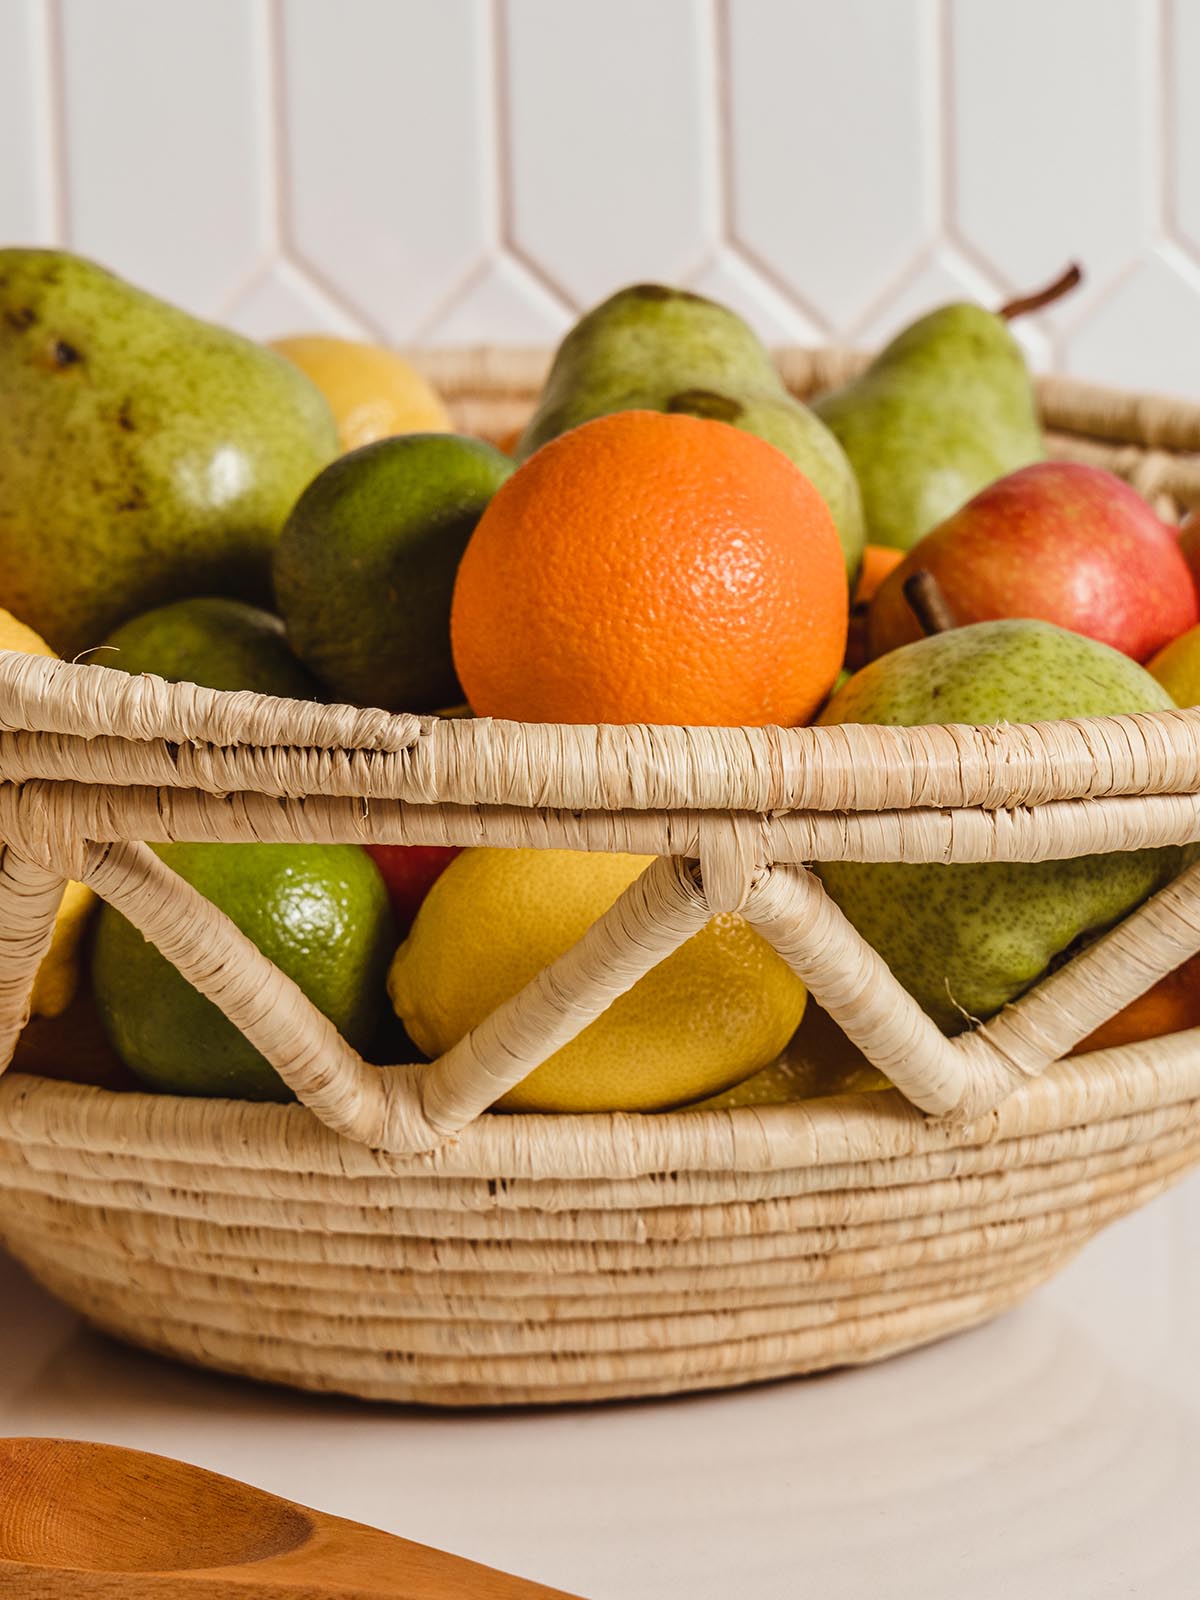 Detail of woven fruit basket full of a variety of fruits.